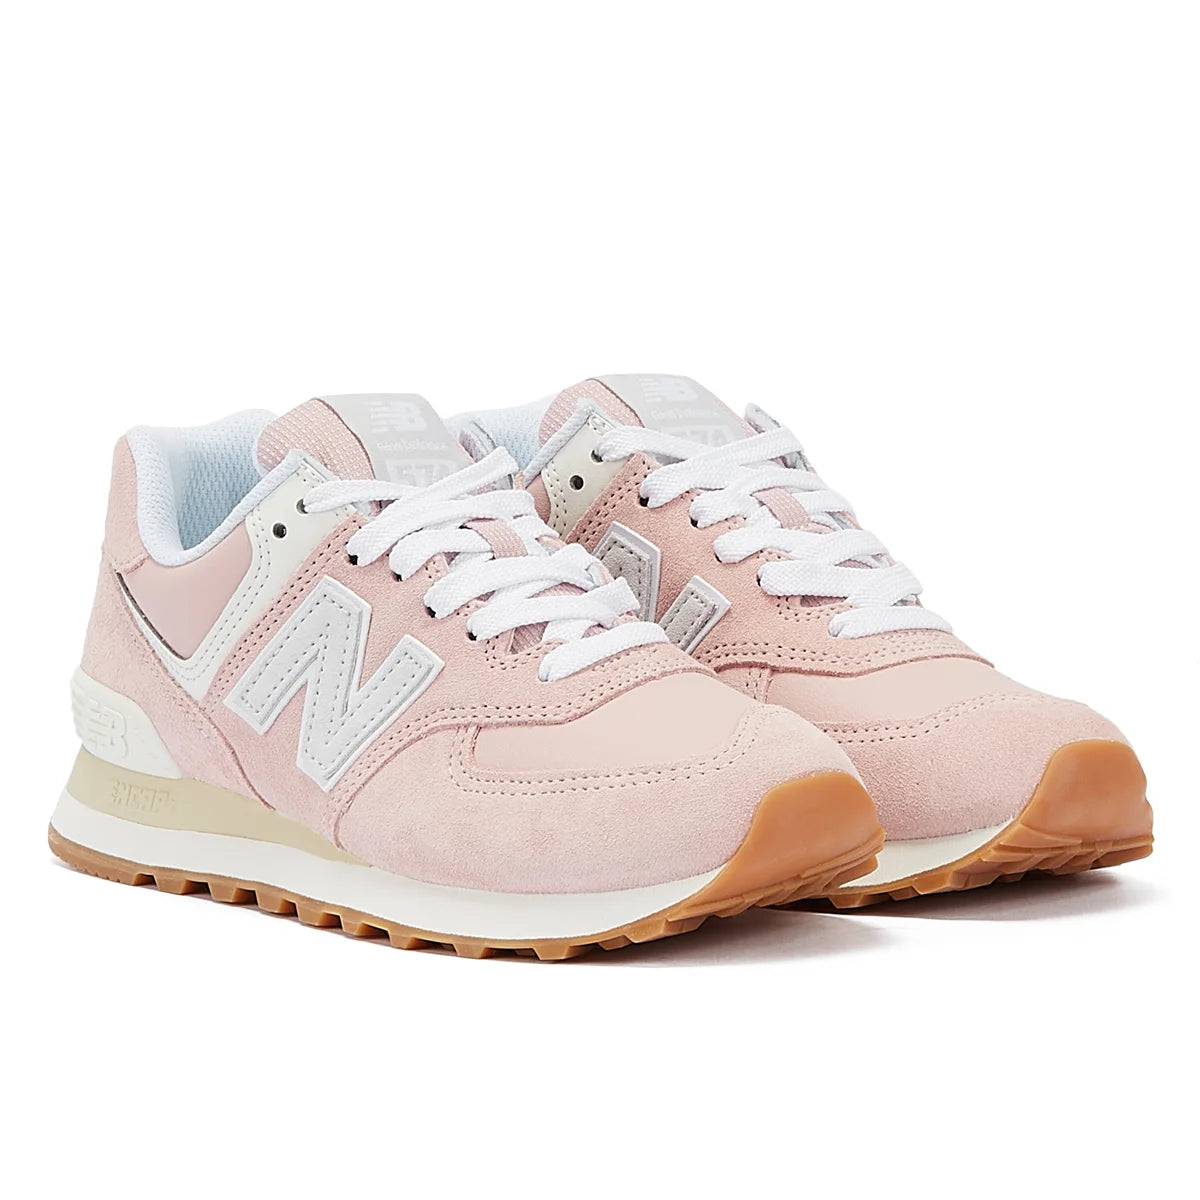 New Balance 574 Orb Suede Women’s Pink Trainers